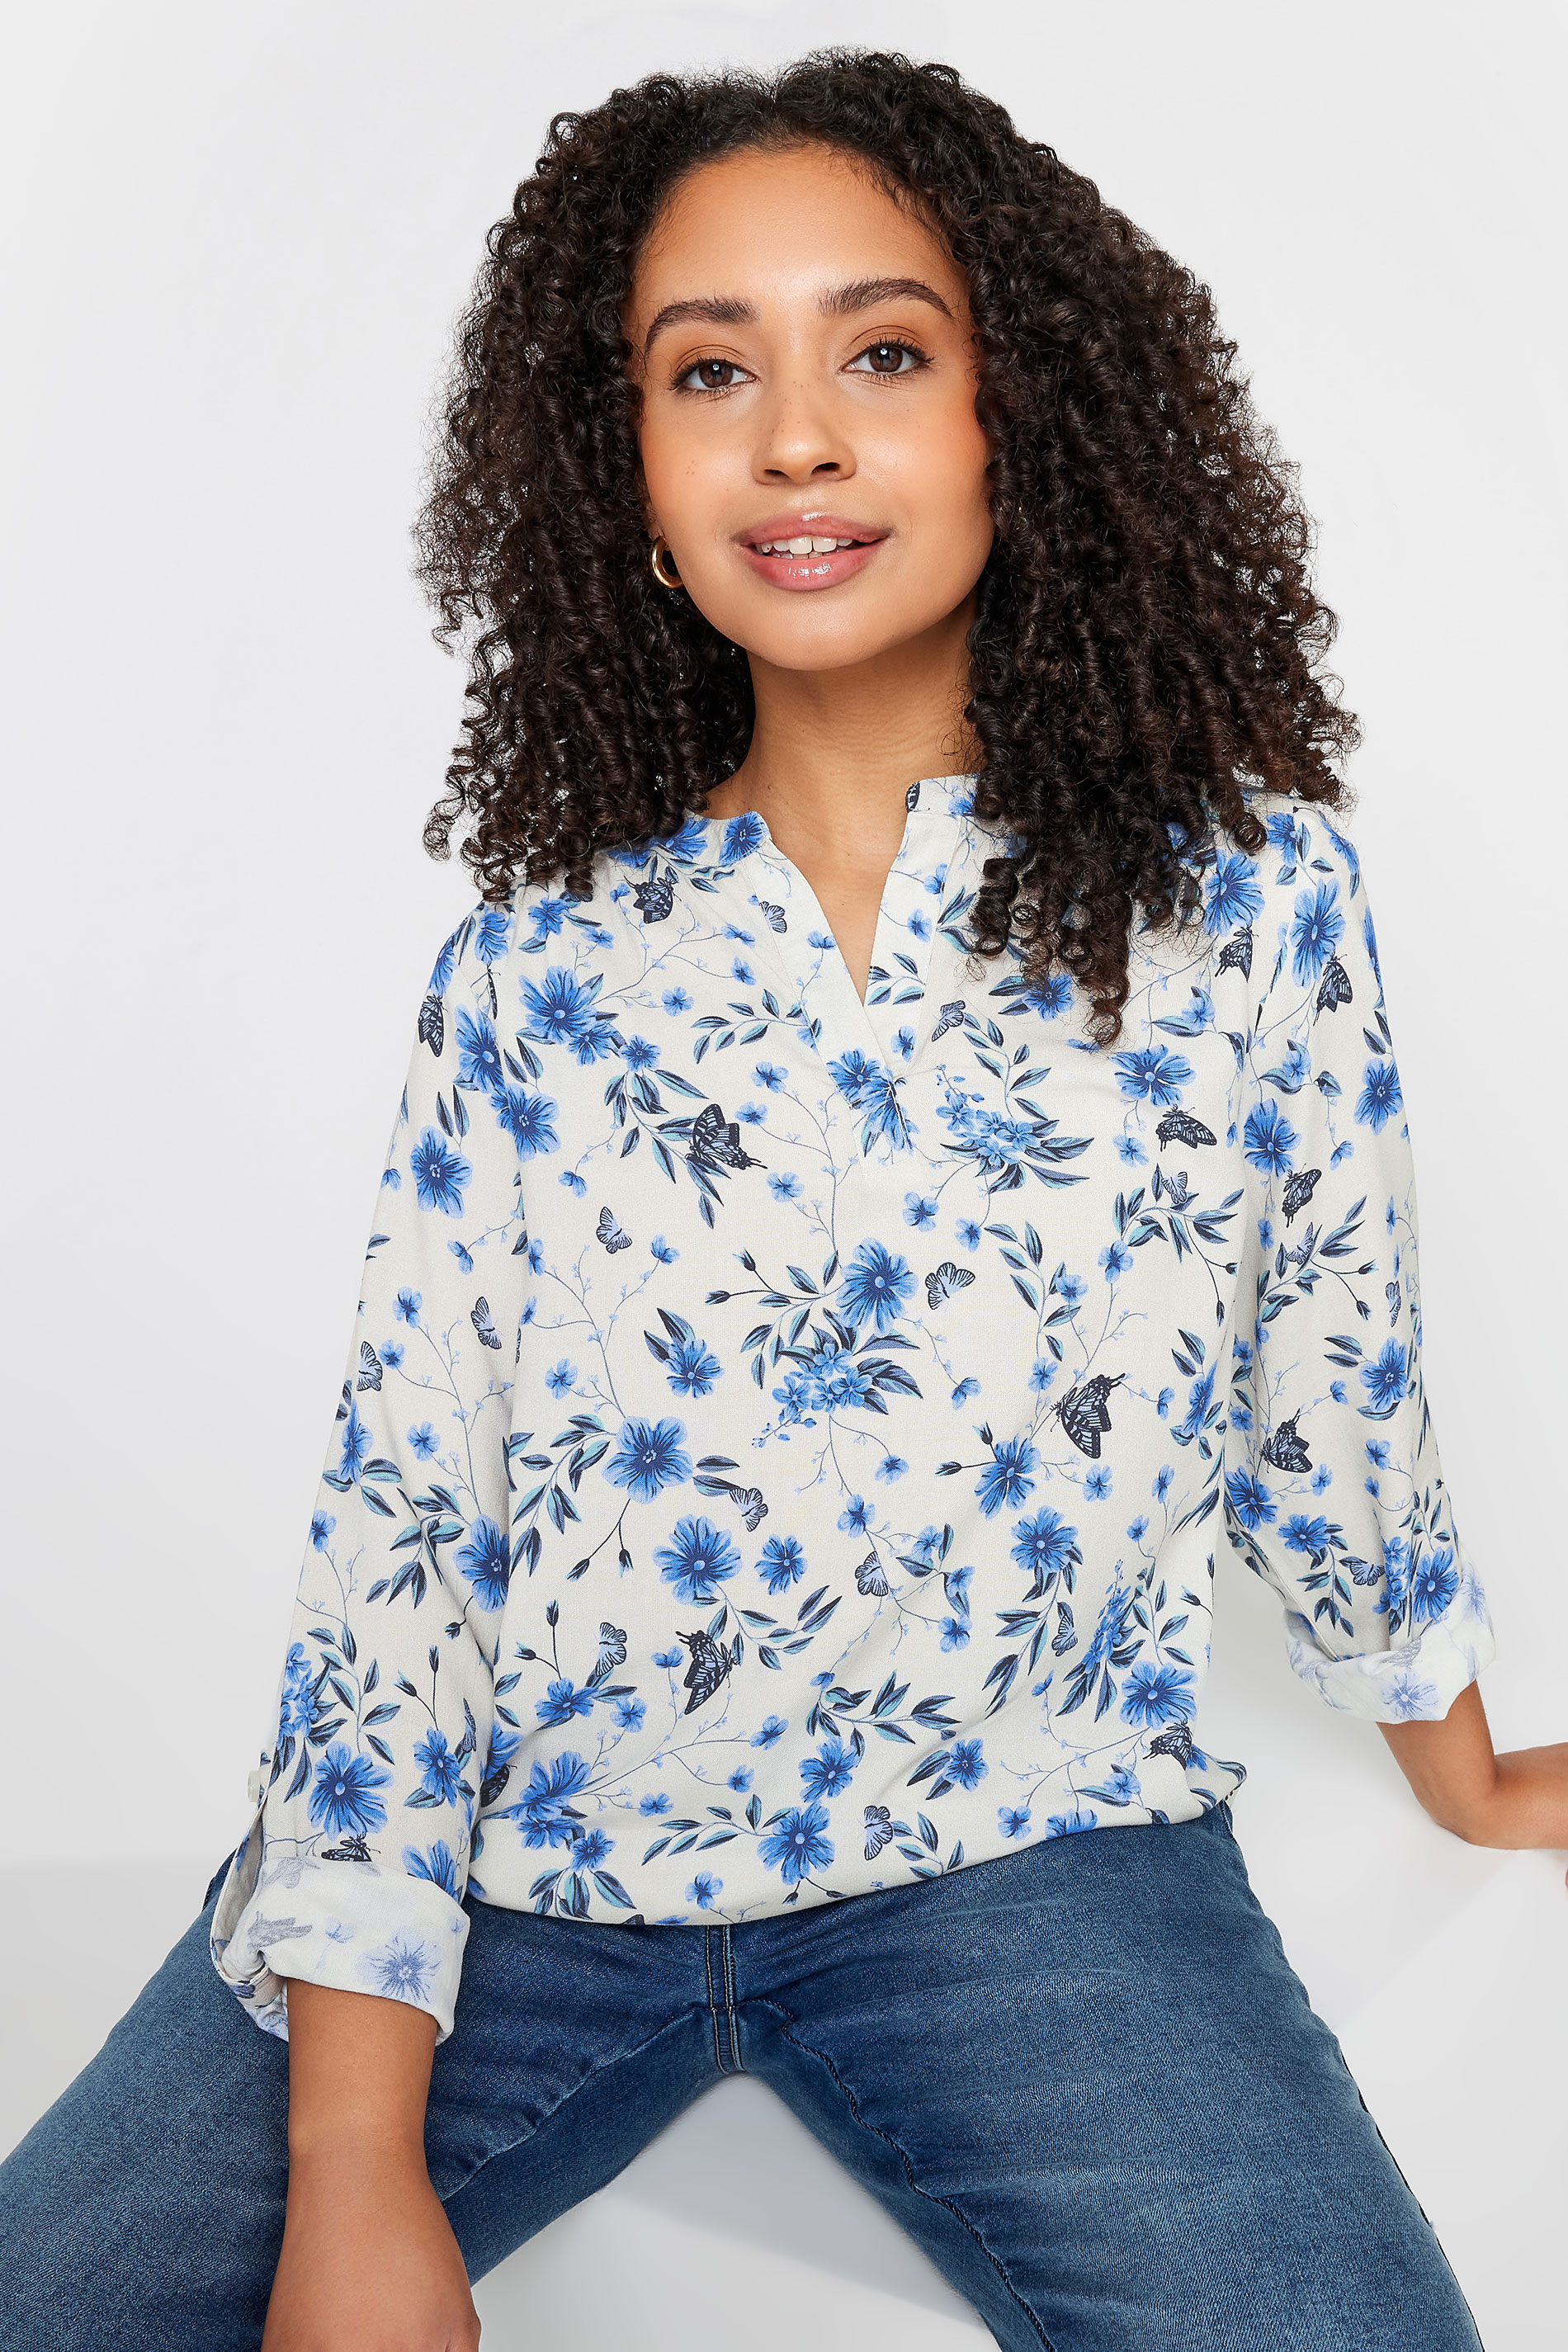 M&Co Petite Ivory White & Blue Butterfly Print Blouse | M&Co 1